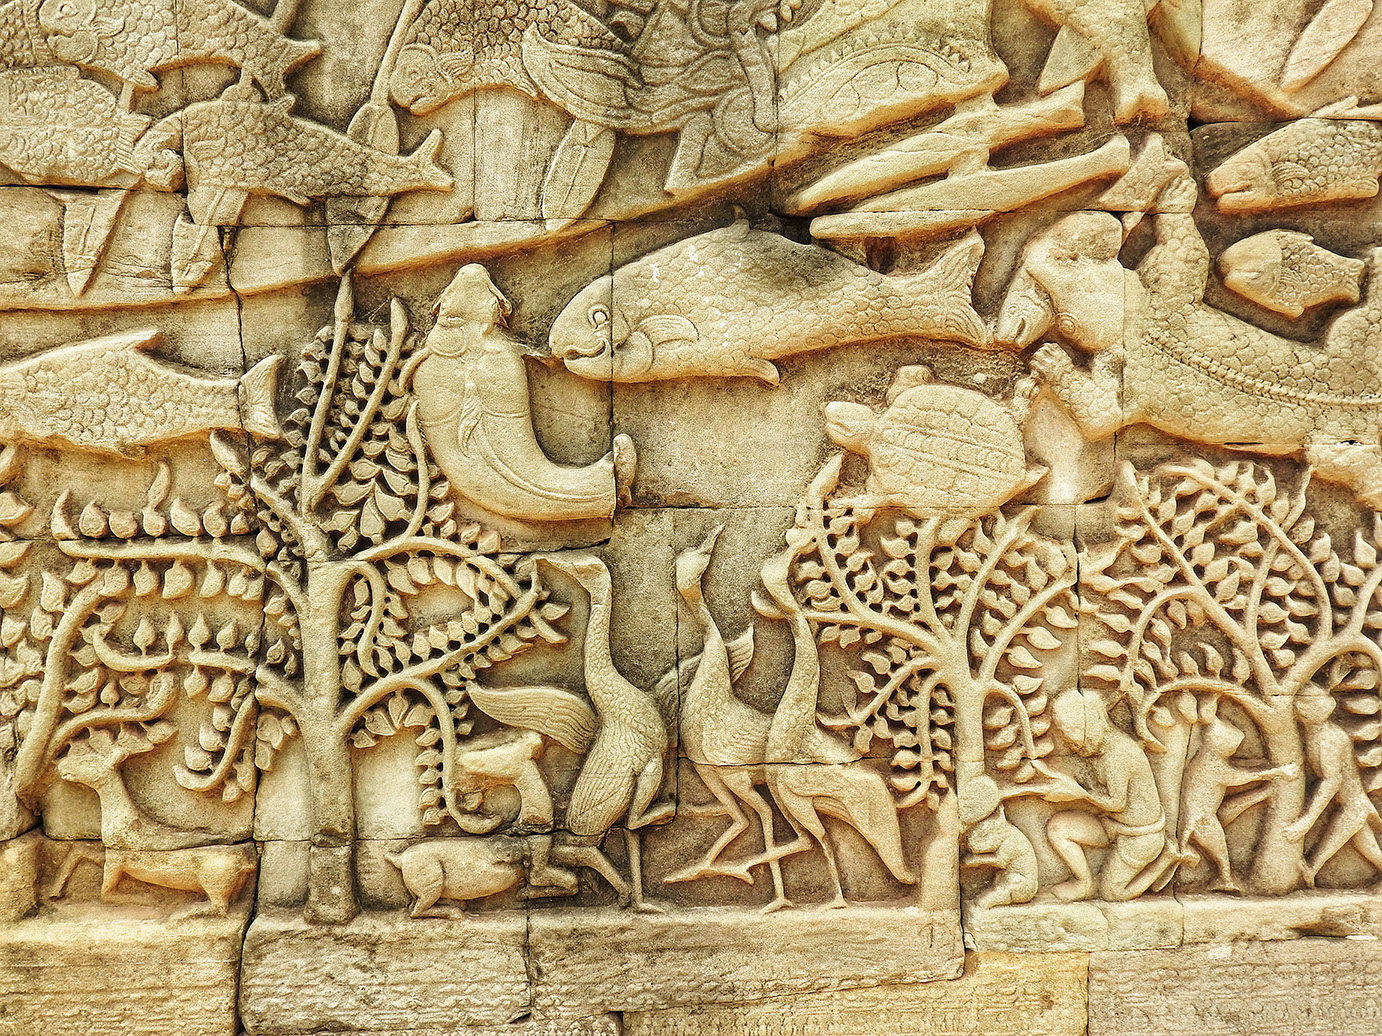 Intricate carvings in Angkor Wat depict the daily life of people during the Khmer Era